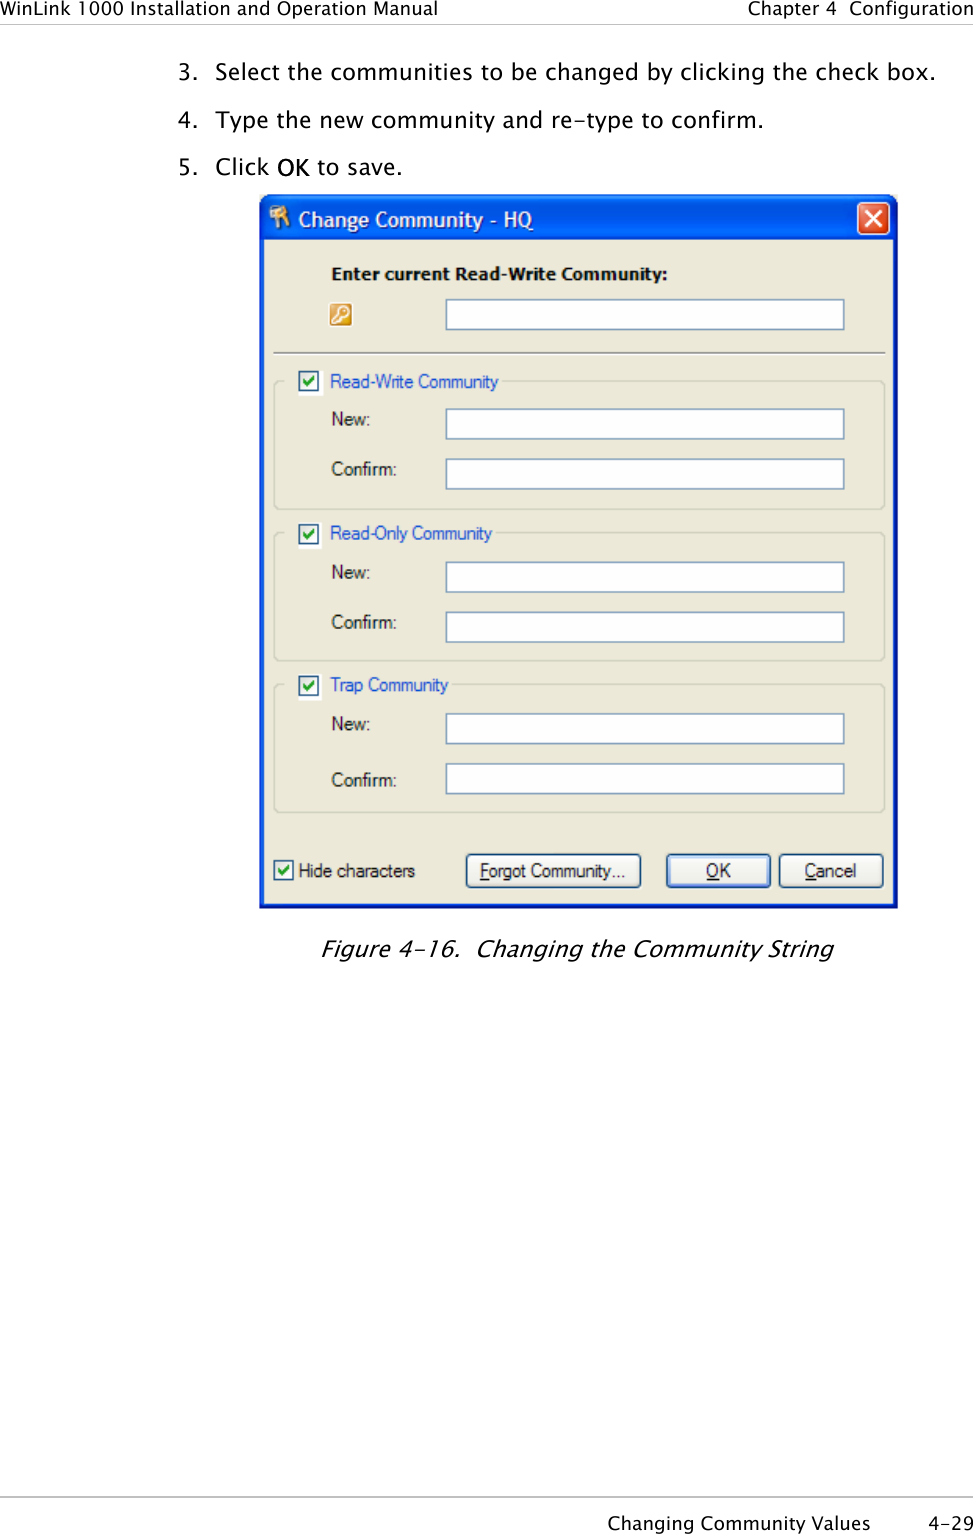 WinLink 1000 Installation and Operation Manual  Chapter  4  Configuration 3. Select the communities to be changed by clicking the check box. 4. Type the new community and re-type to confirm.  5. Click OK to save.  Figure  4-16.  Changing the Community String  Changing Community Values  4-29 